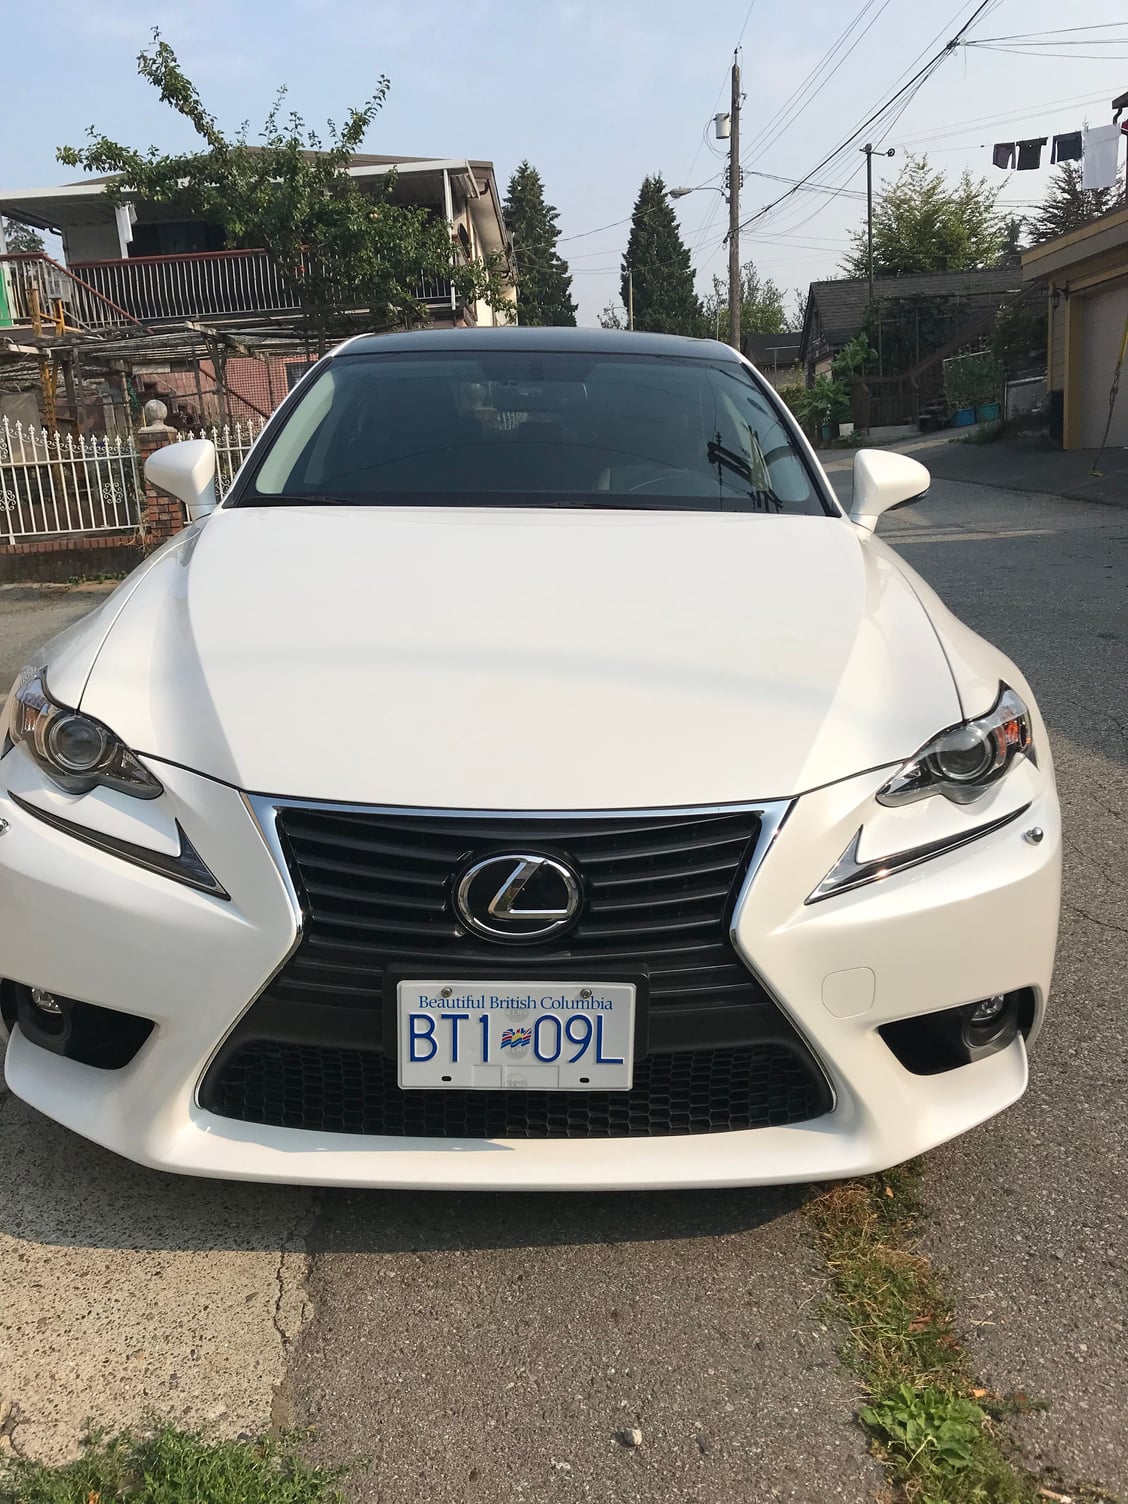 2015 Lexus IS250 - 2015 Lexus IS250 - Used - VIN JTHBF5D26F5054039 - 24,500 Miles - 6 cyl - 2WD - Automatic - Sedan - White - Vancouver, BC V5M1W8, Canada